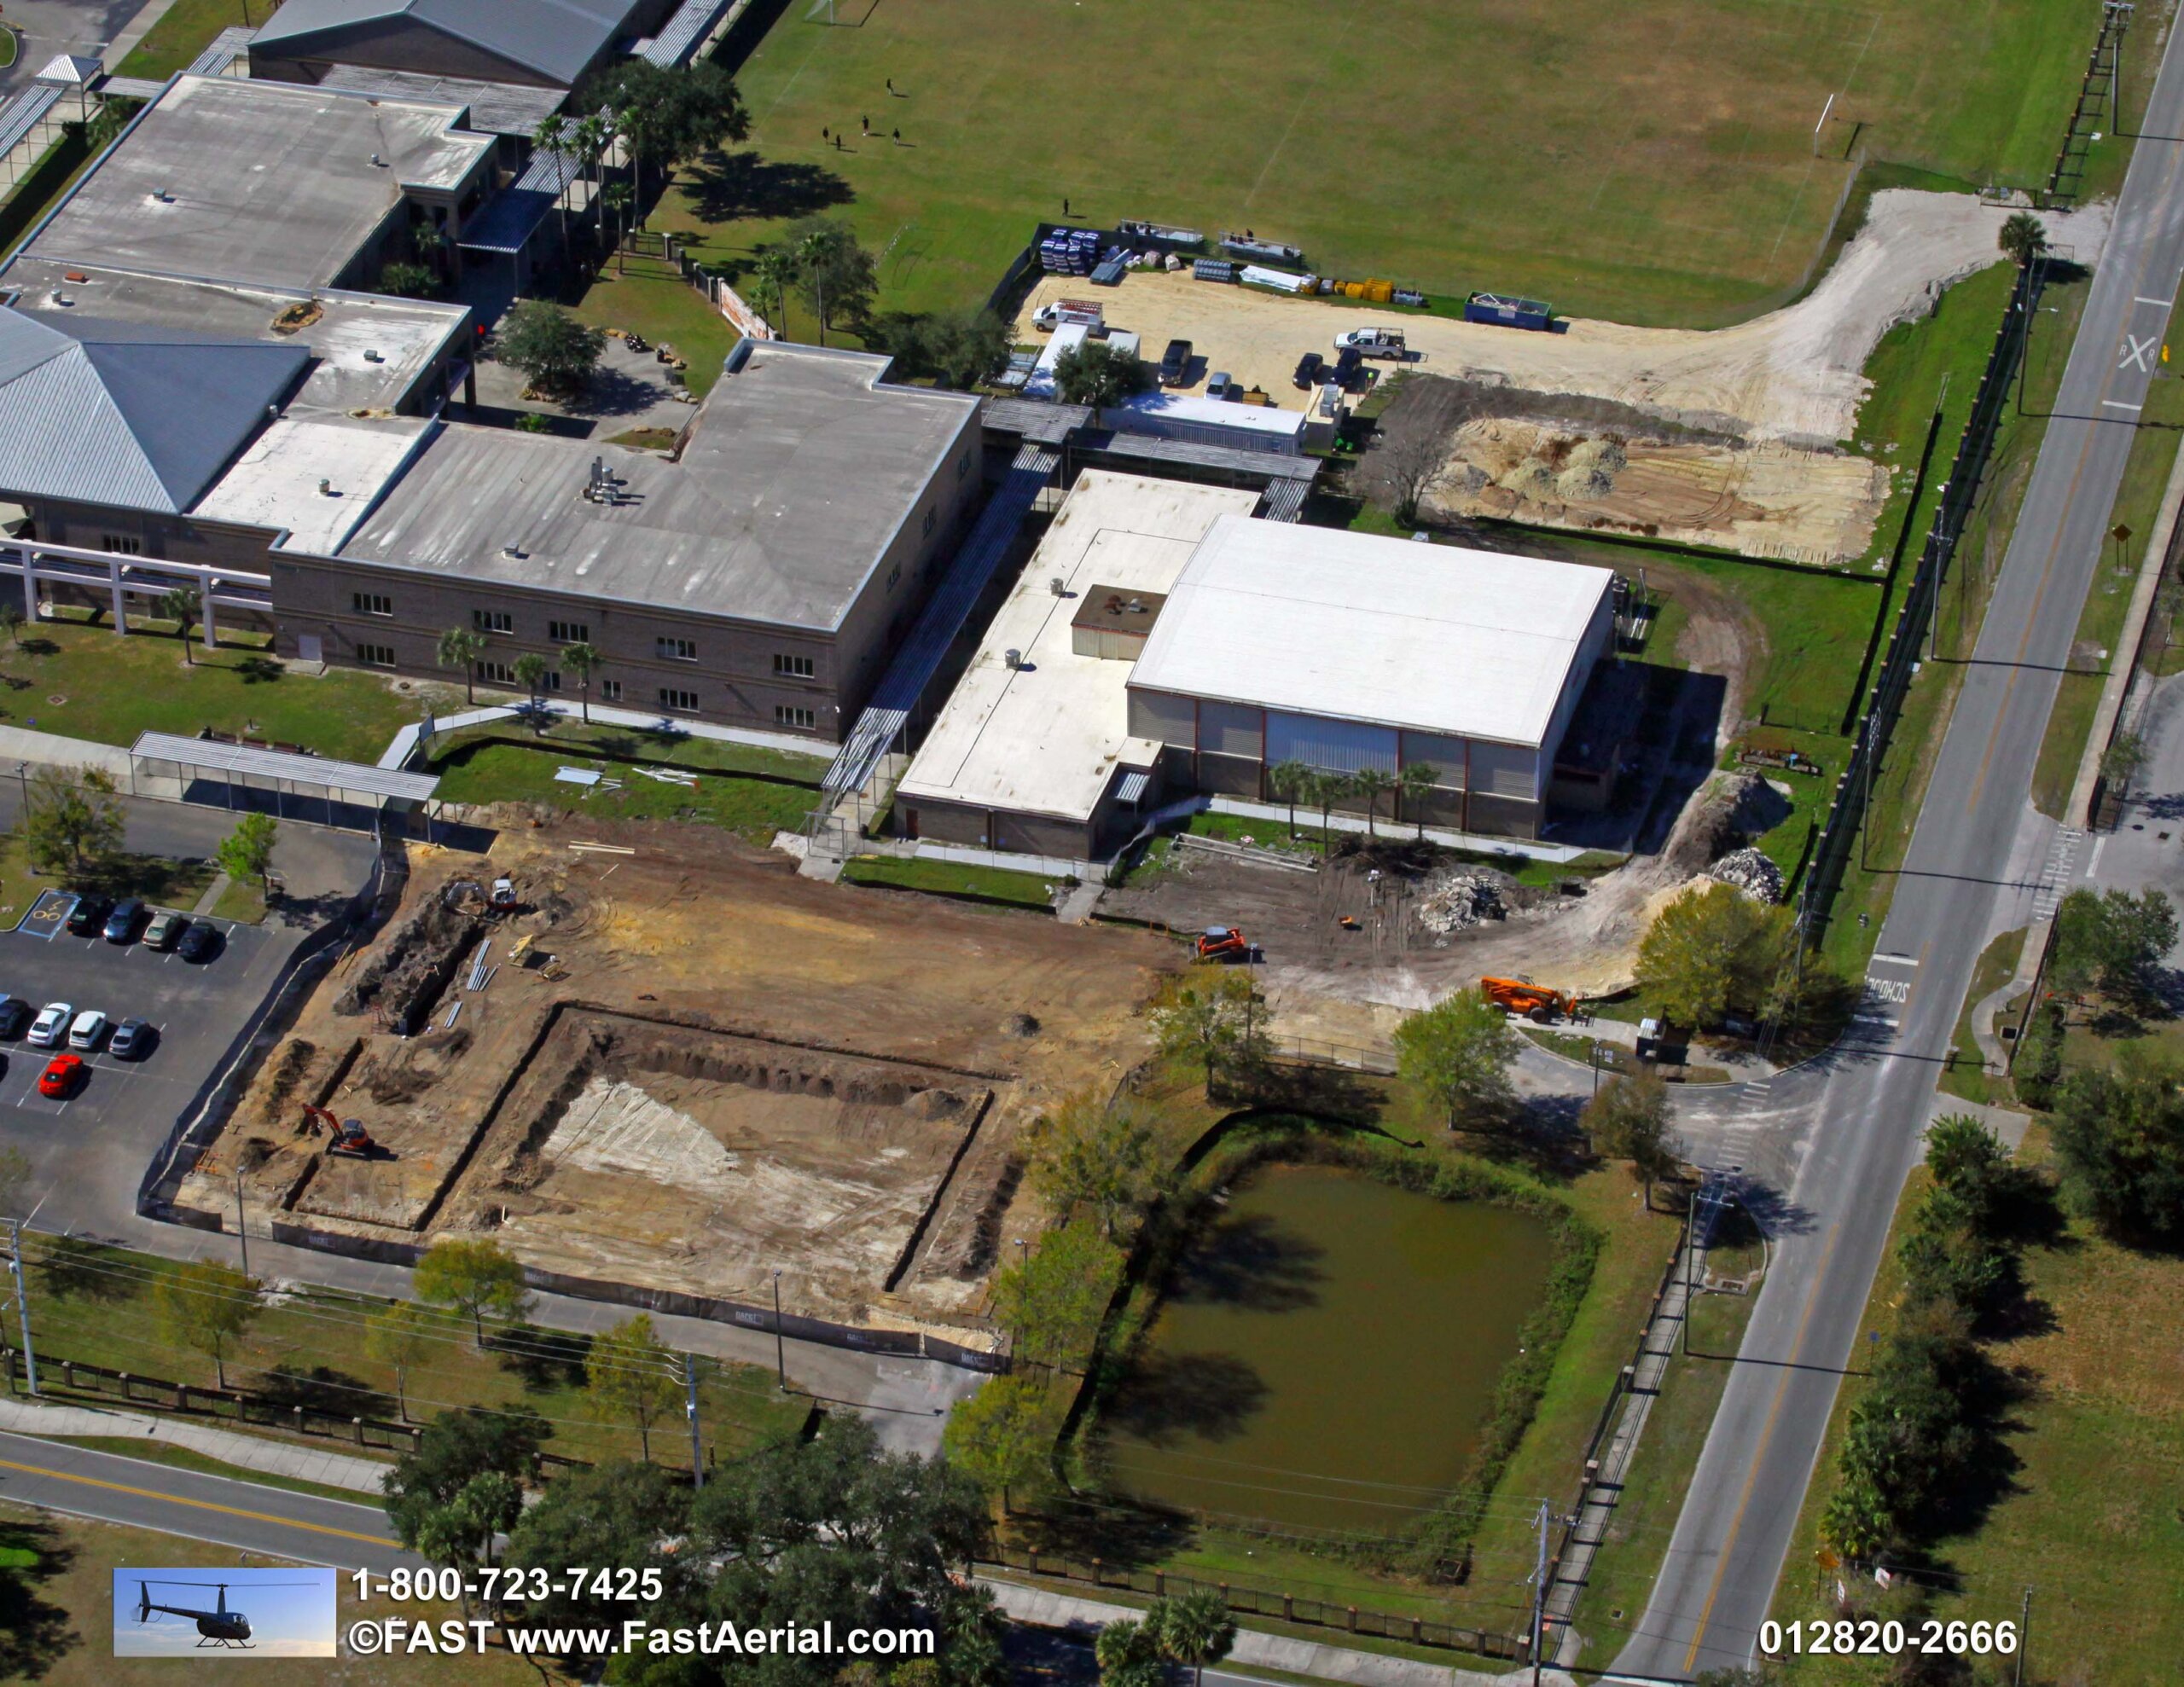 Aerial photo of Crooms Academy of Information Technology Gymnasium & Central Energy Plant